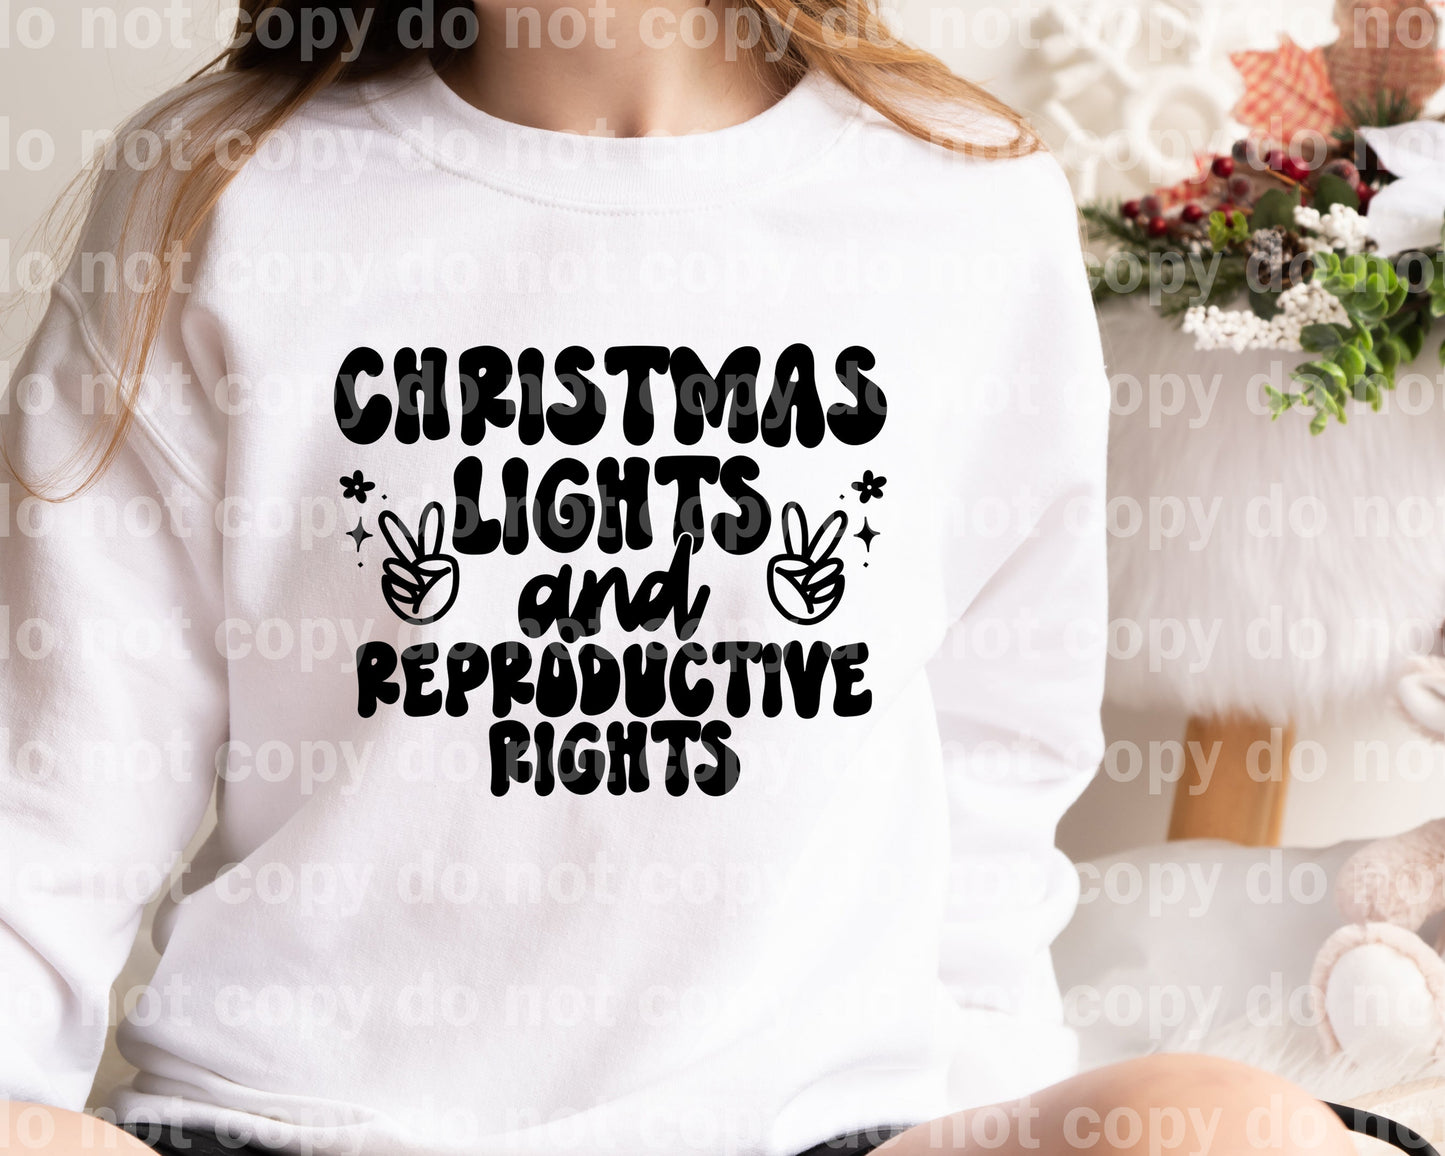 Christmas Lights And Reproductive Lights Full Color/One Color Dream Print or Sublimation Print